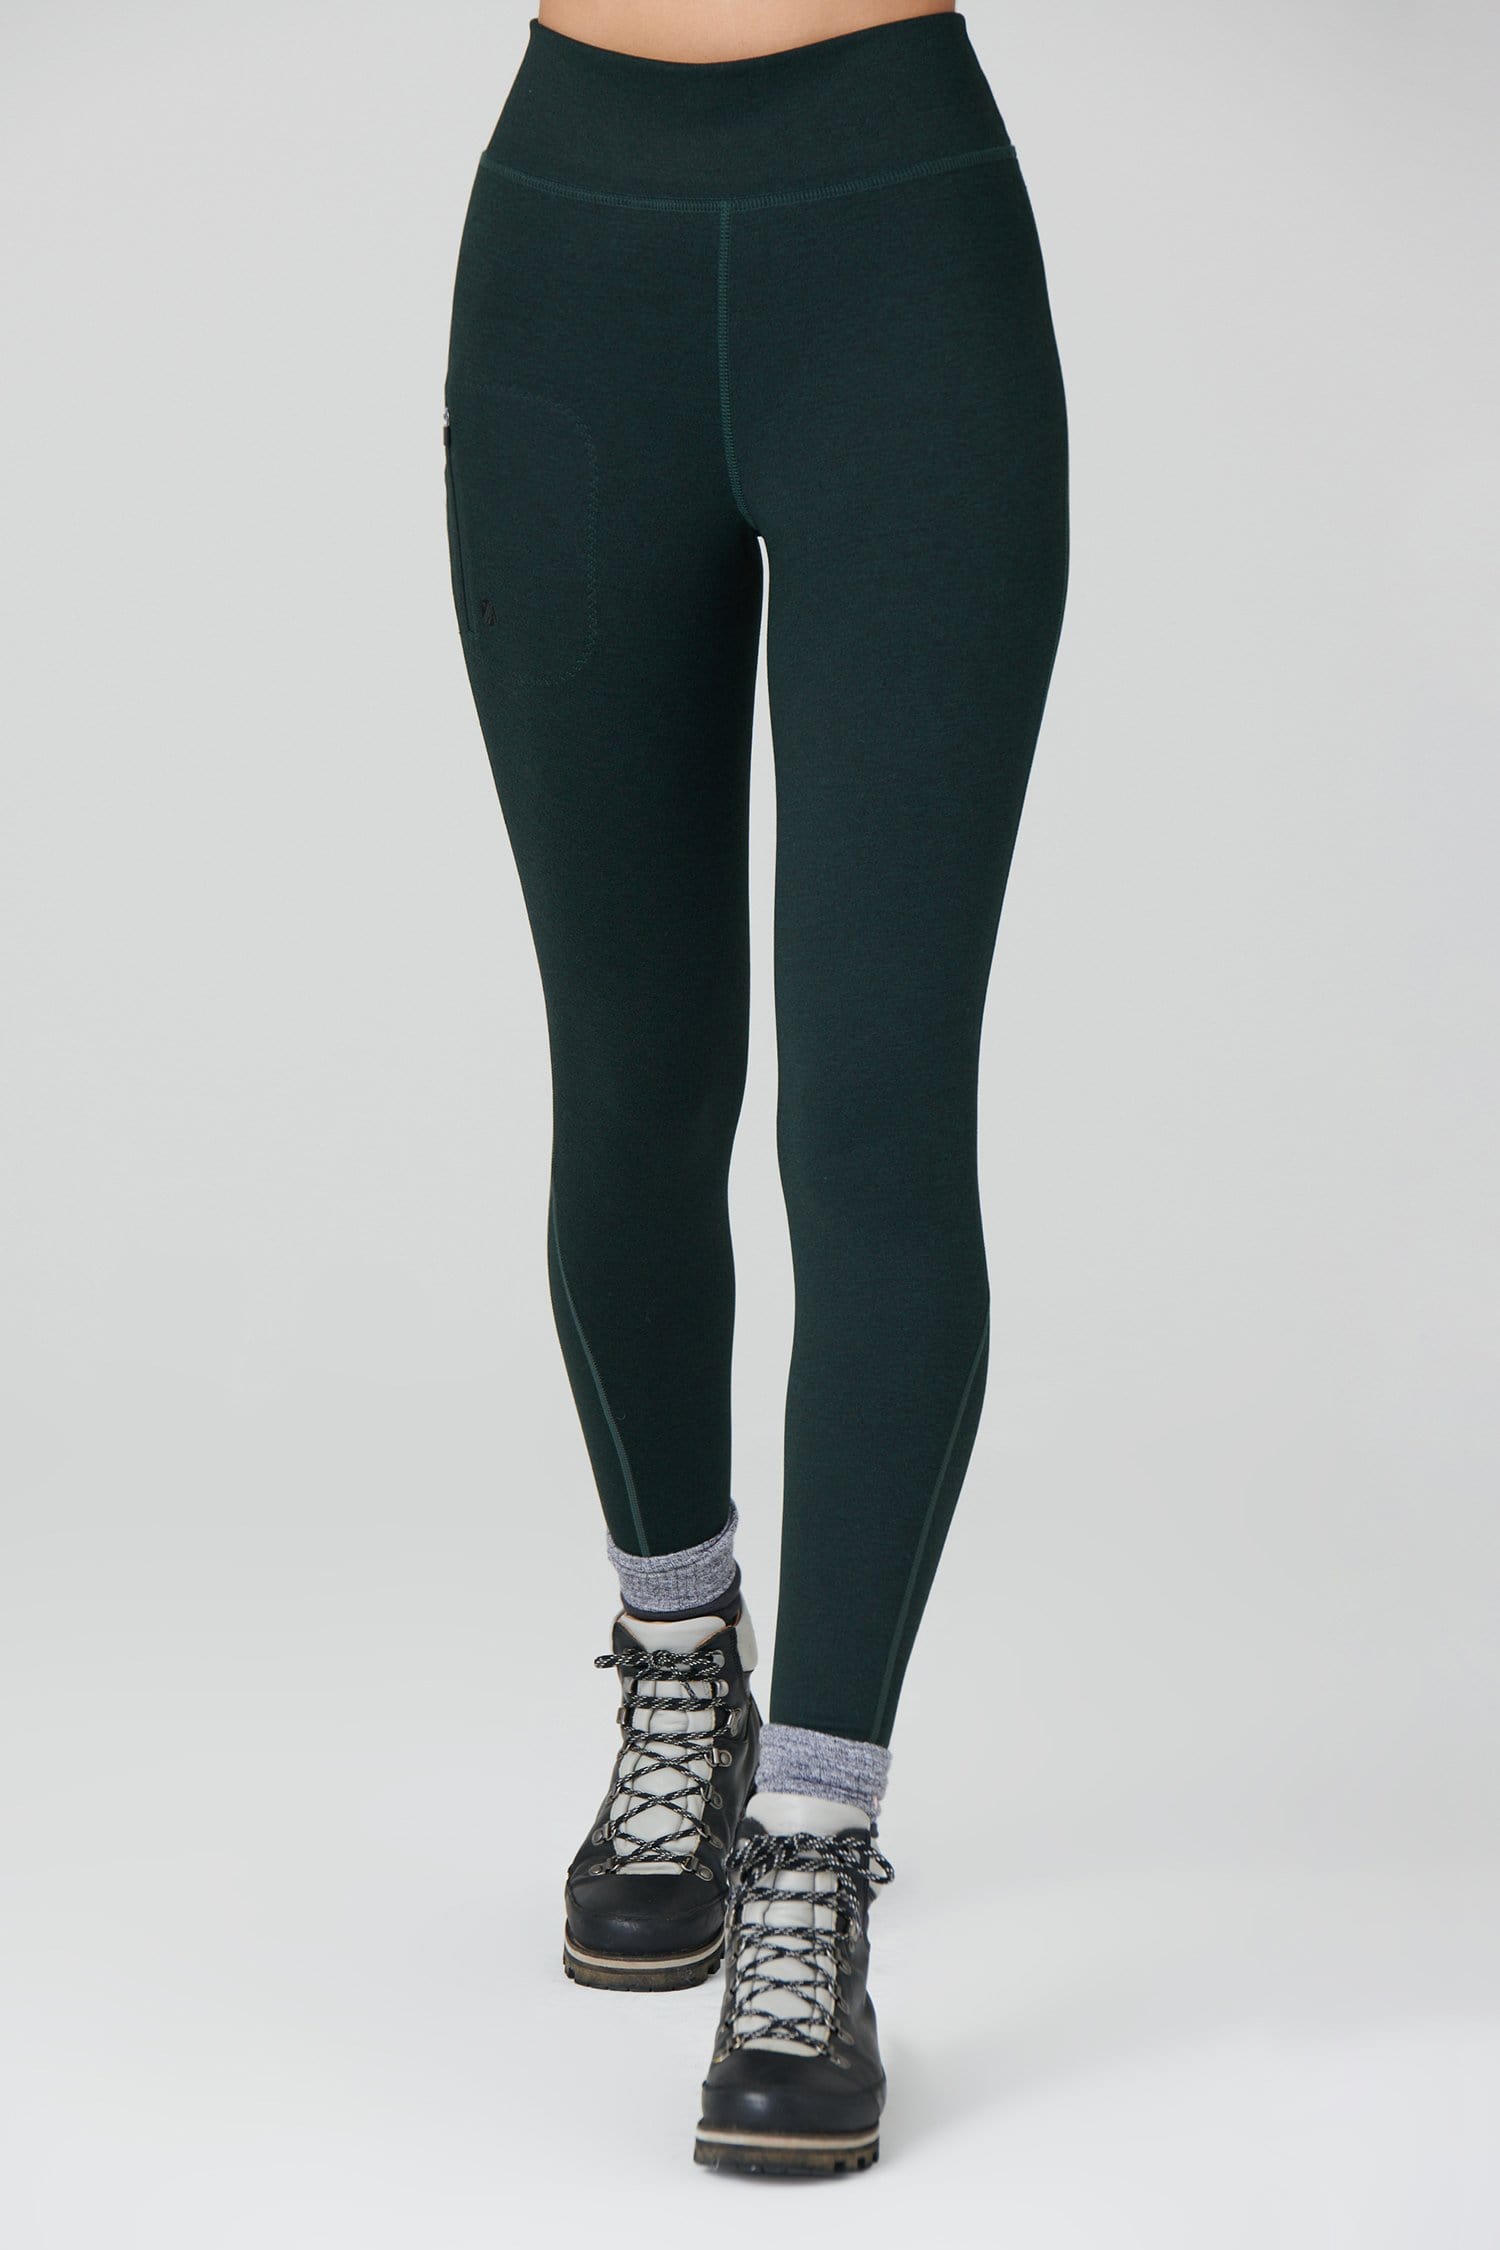 Thermal Outdoor Leggings - Forest Green - Small / Uk10 - Womens - Acai Outdoorwear